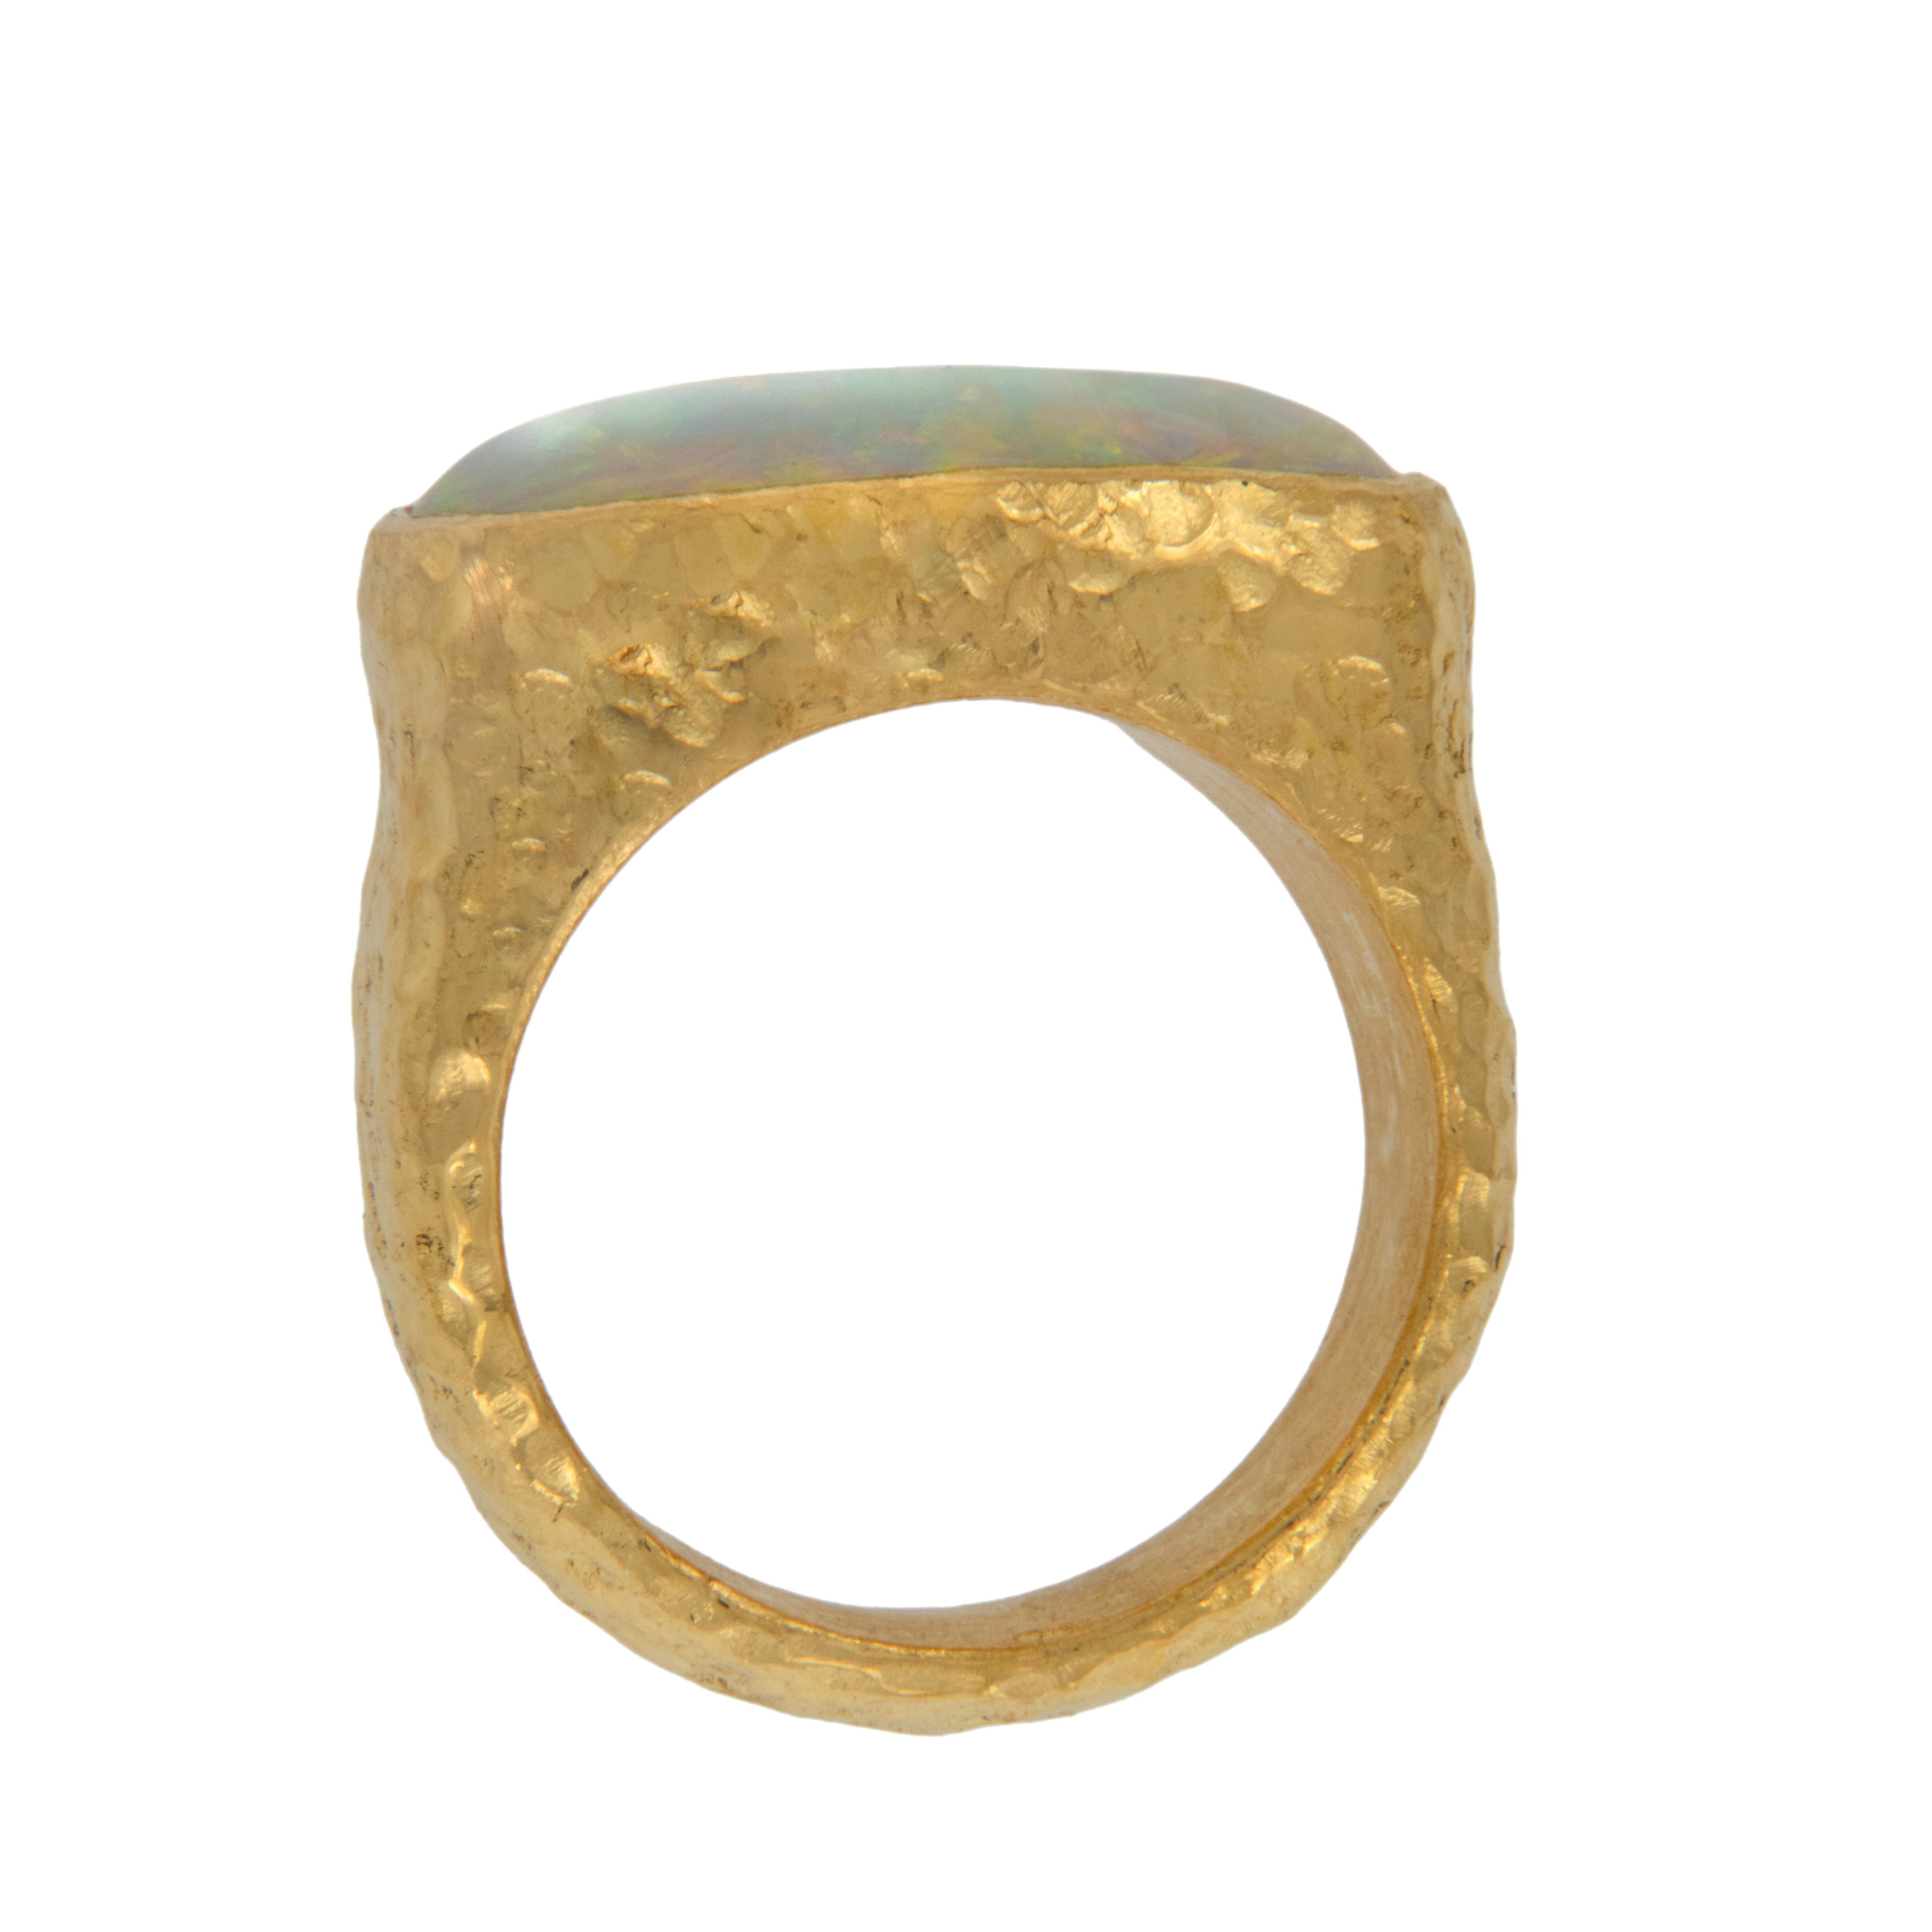 Contemporary Pure 24 Karat Yellow Gold One of a Kind 5.29 Carat Australian Opal Ring For Sale